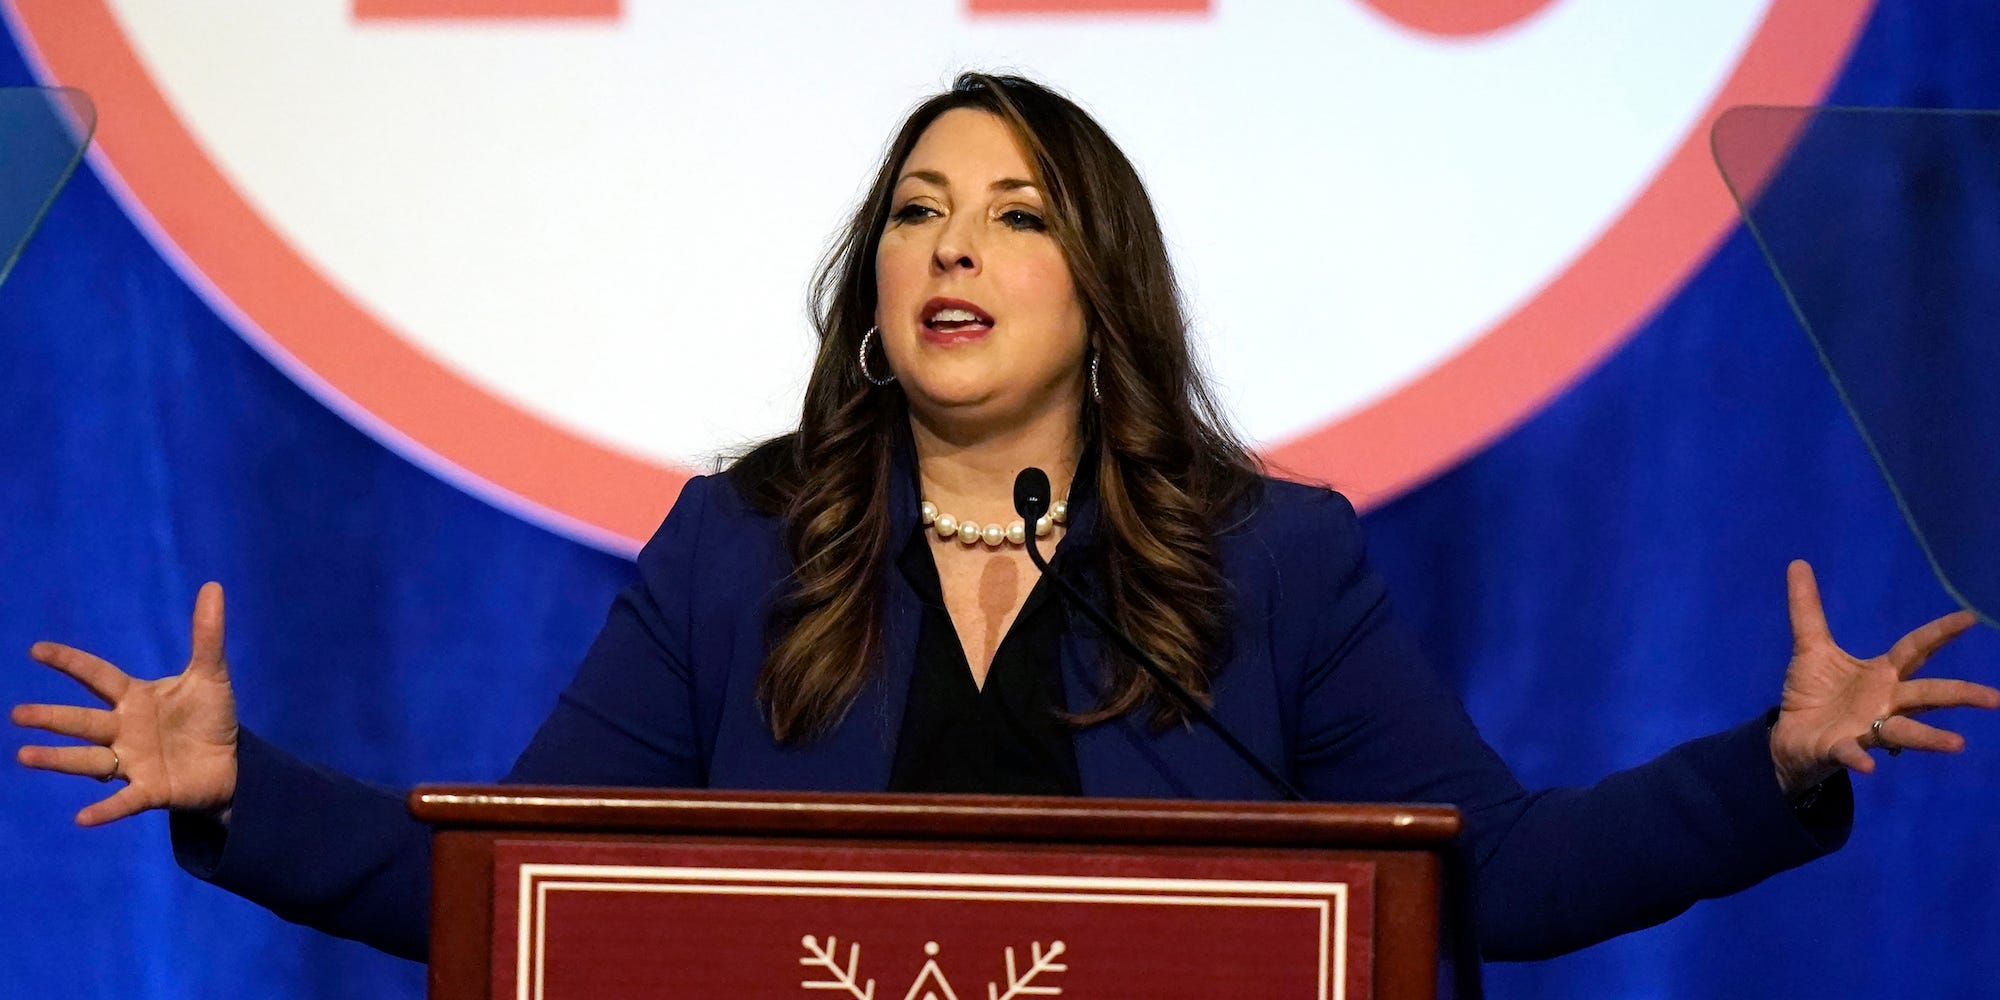 Ronna McDaniel, the GOP chairwoman, speaks during the Republican National Committee winter meeting Friday, Feb. 4, 2022, in Salt Lake City